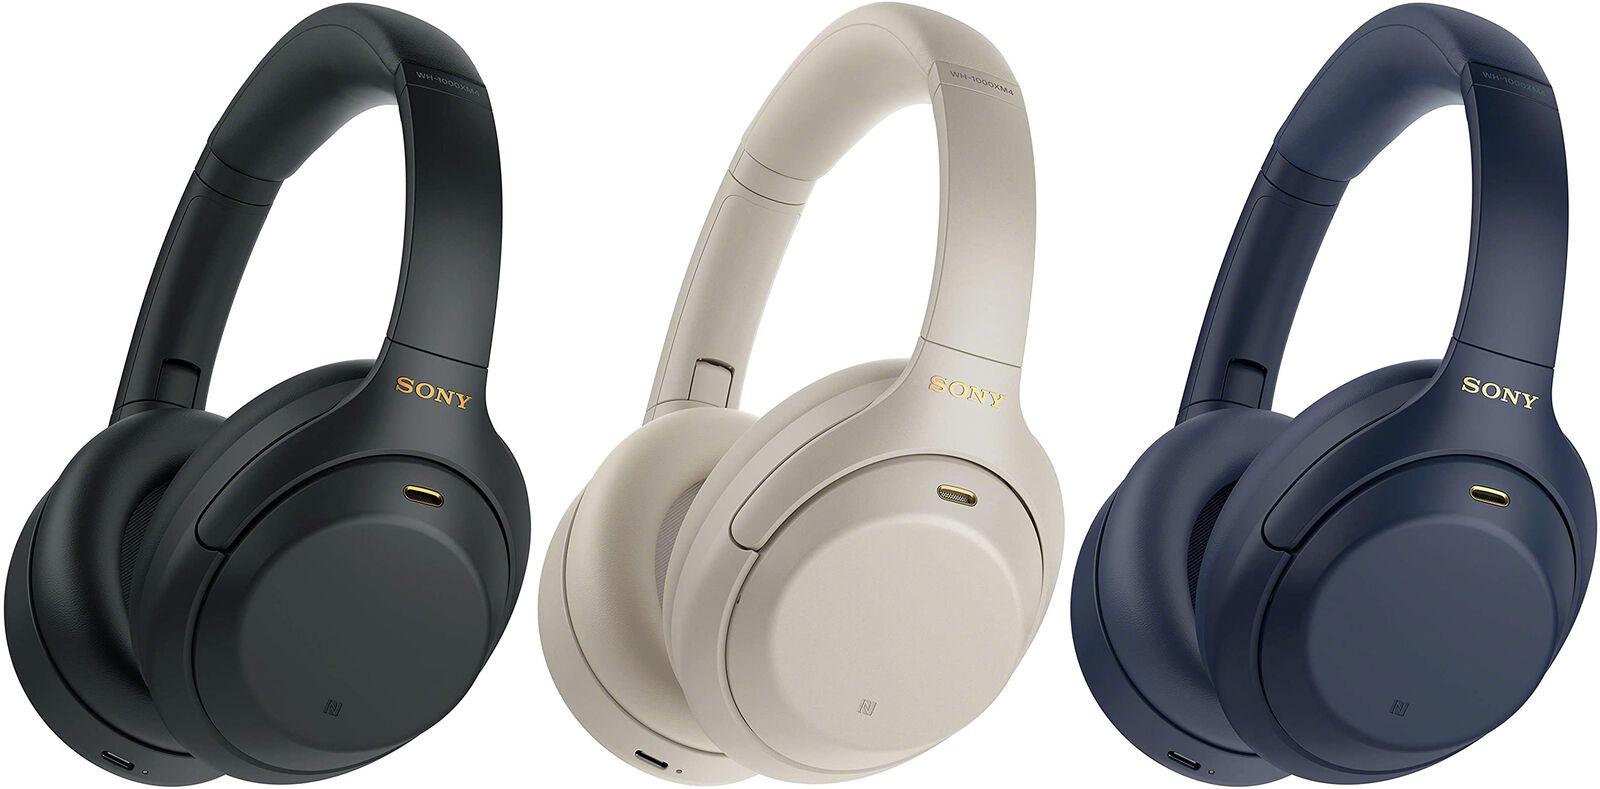 Sony WH-1000XM4 Wireless Noise Cancelling Headphones for $259.99 Shipped